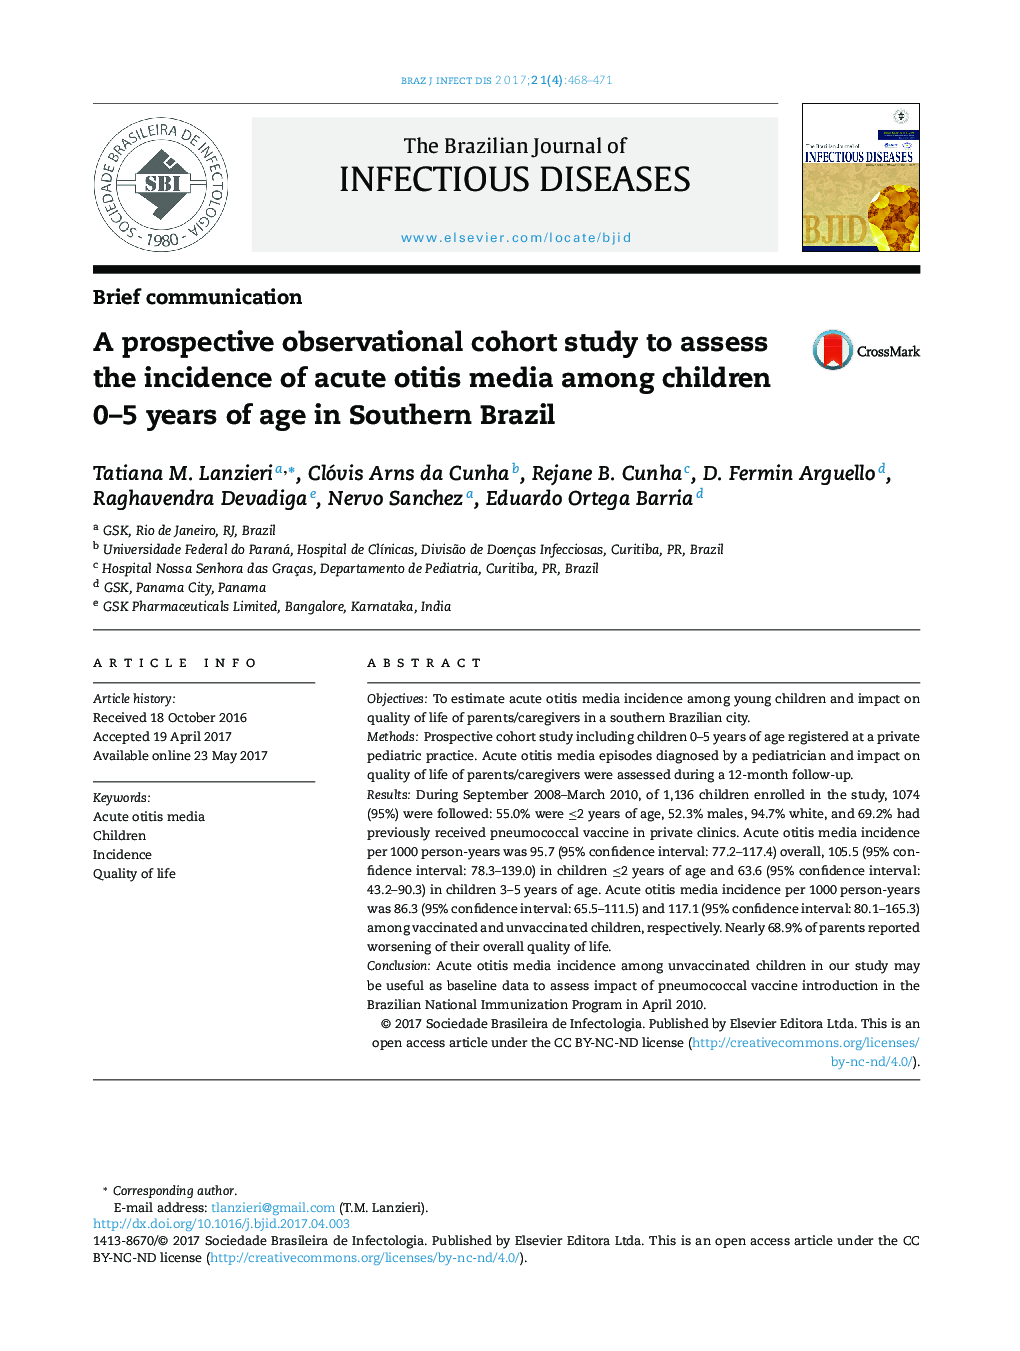 A prospective observational cohort study to assess the incidence of acute otitis media among children 0-5 years of age in Southern Brazil